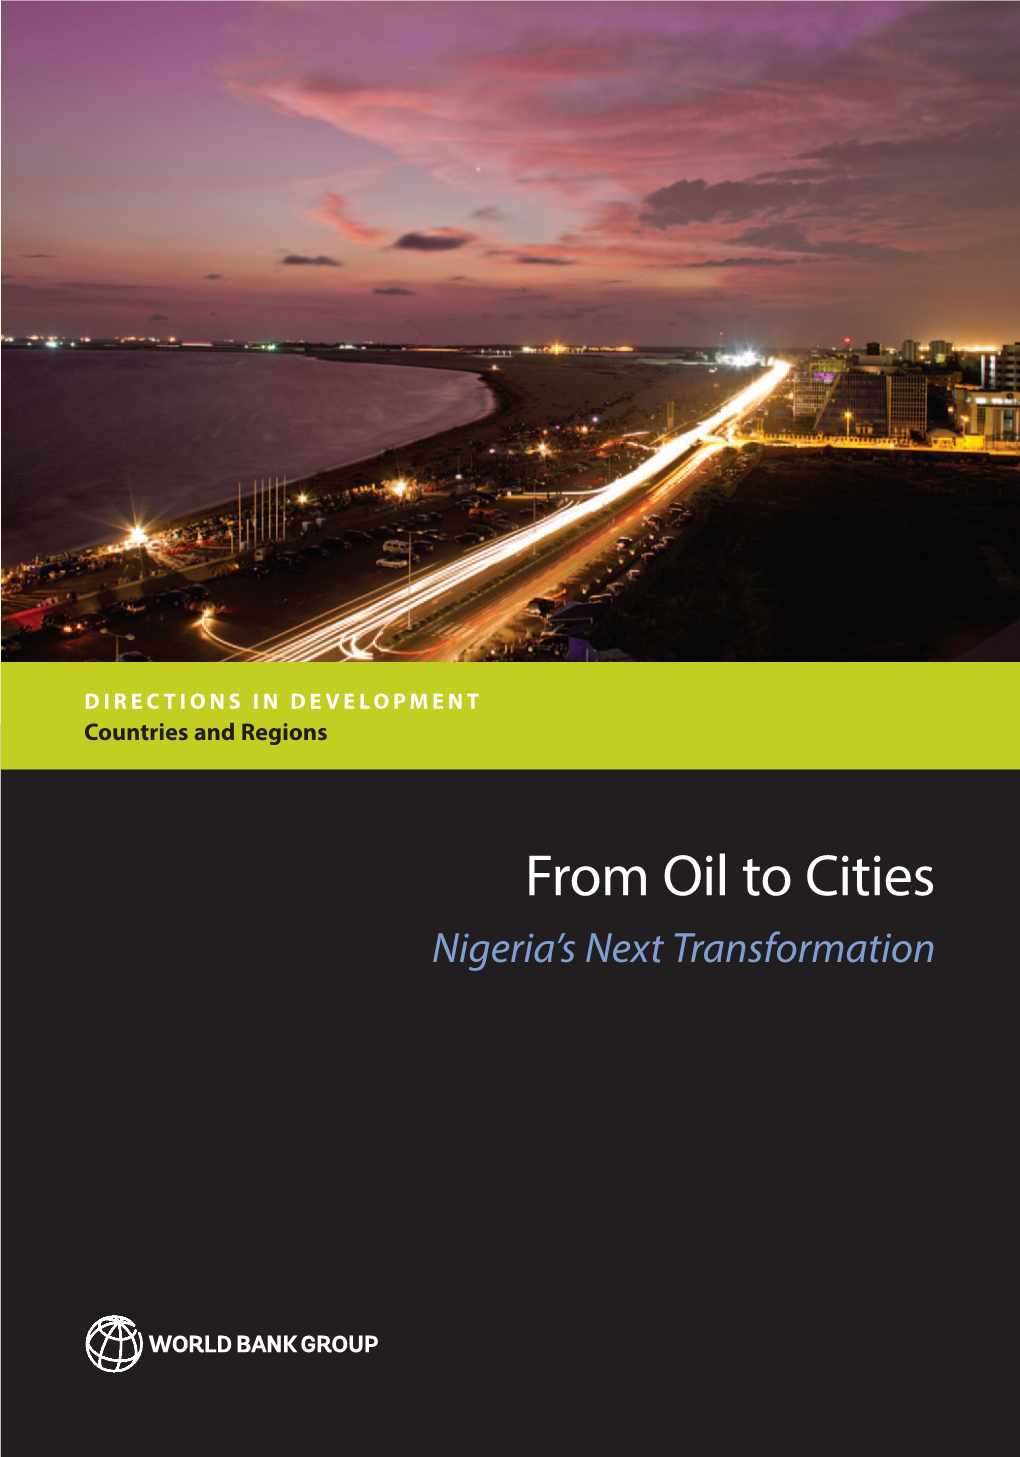 From Oil to Cities: Nigeria's Next Transformation